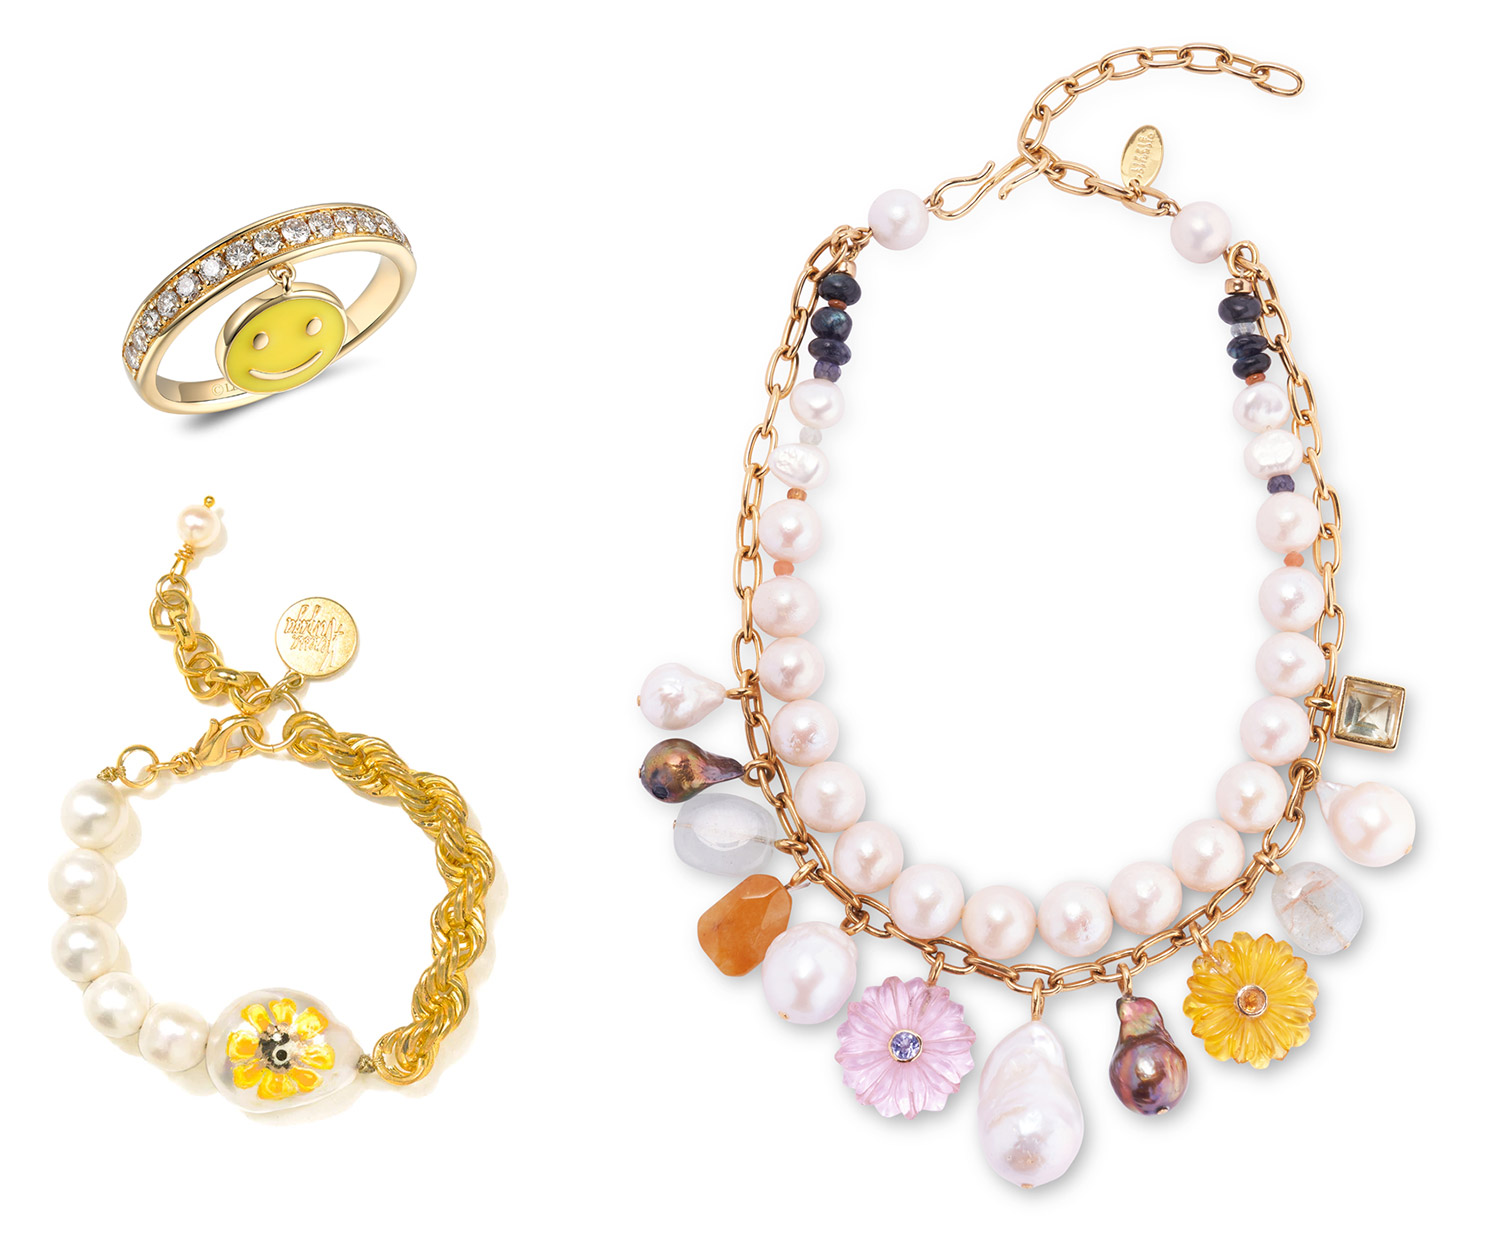 6 Jewelry Trends Destined to Rock the New Year – JCK